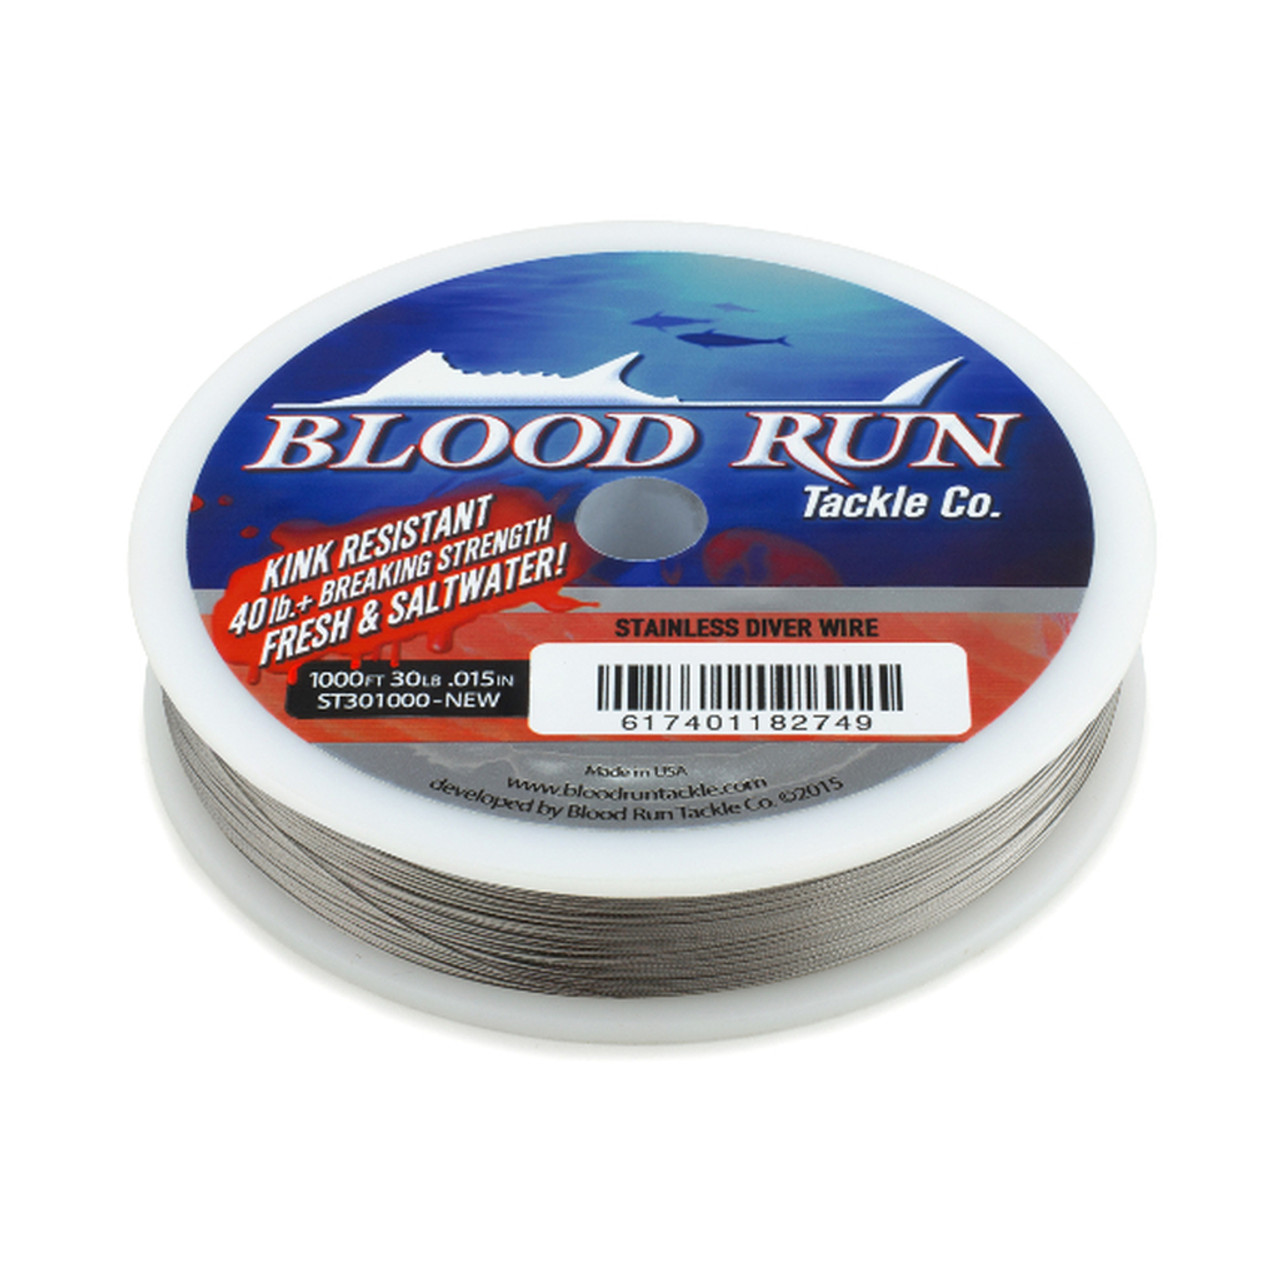 Bloodrun Stainless Diver Wire 1000 Feet - Superior Outfitters